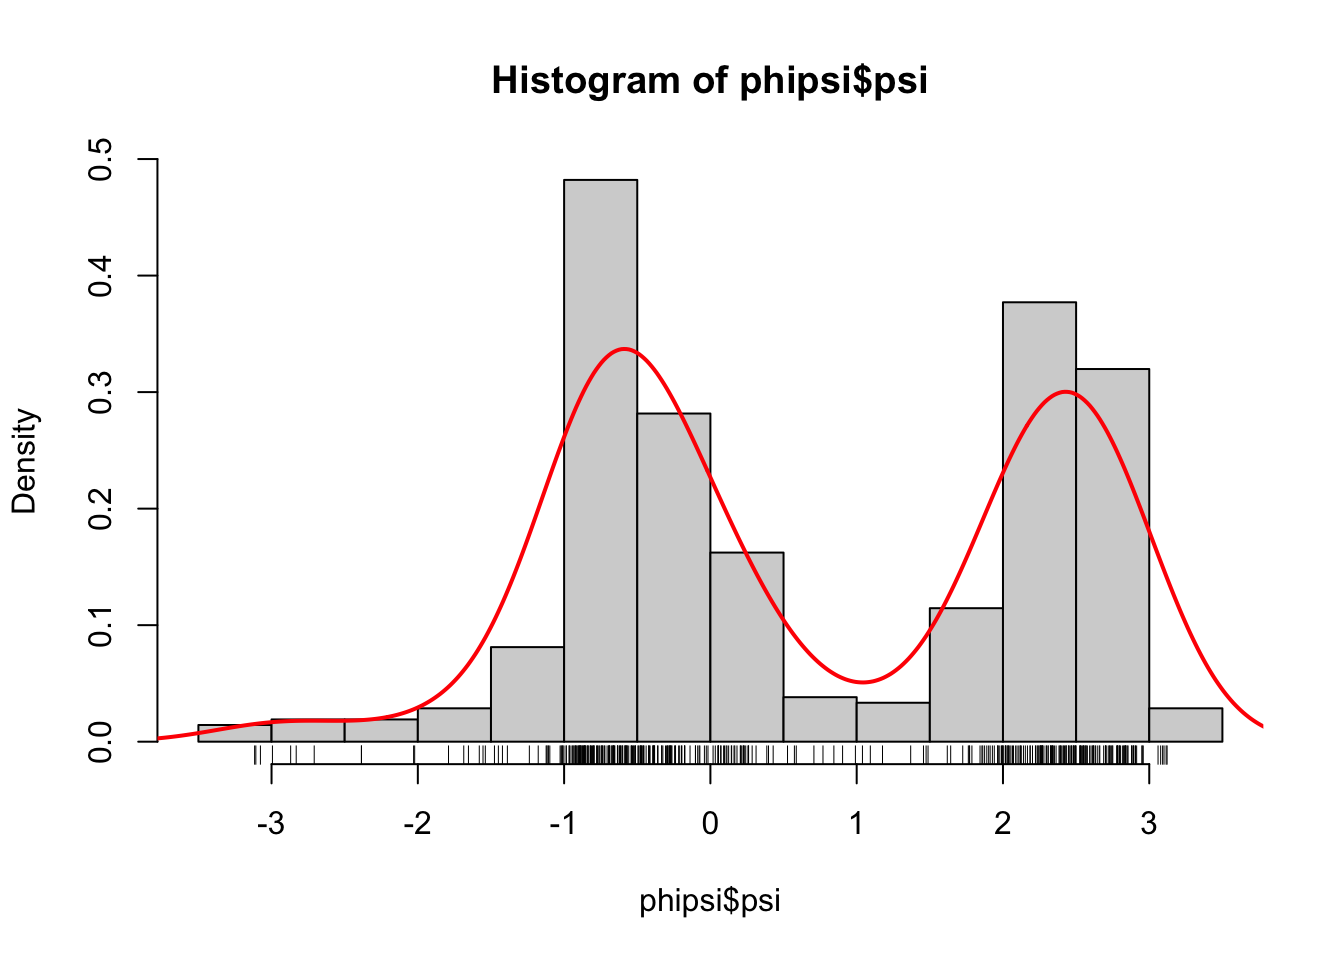 Histograms equipped with a rug plot and smoothed density estimate (red line) of the distribution of \(\phi\)-angles (left) and \(\psi\)-angles (right).